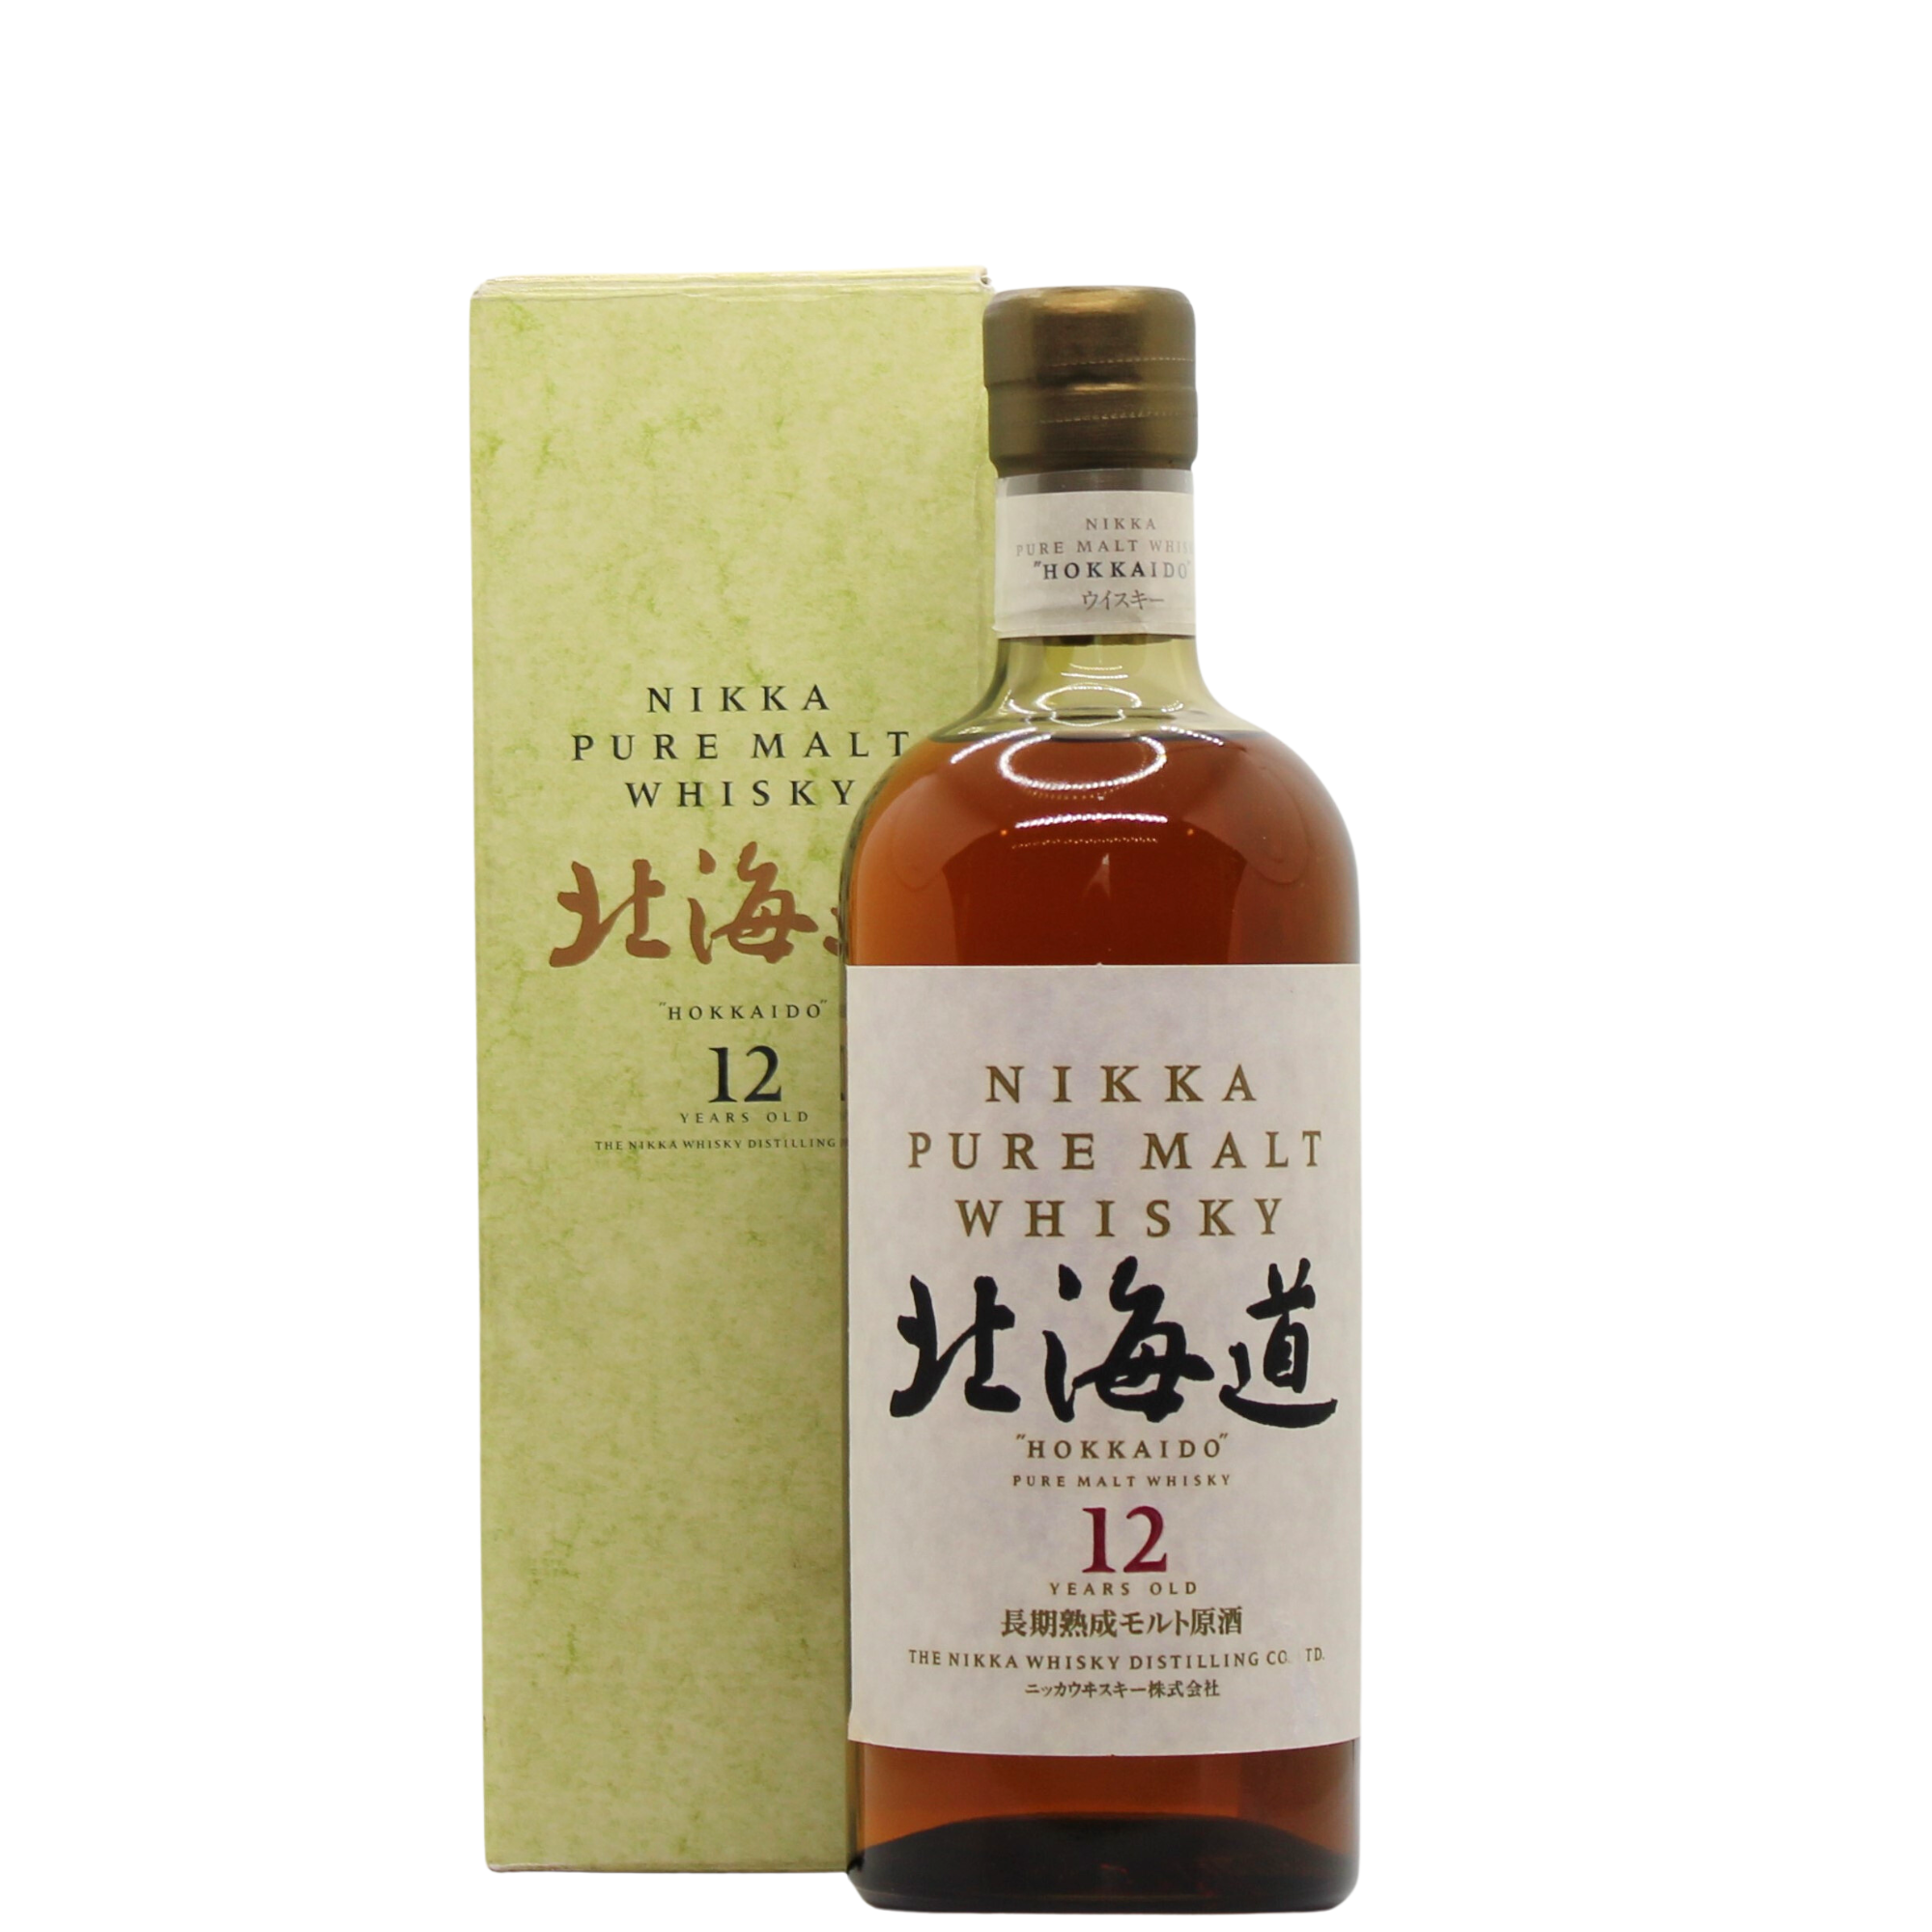 A vintage/discontinued bottling from Nikka using malt whisky from Yoichi.